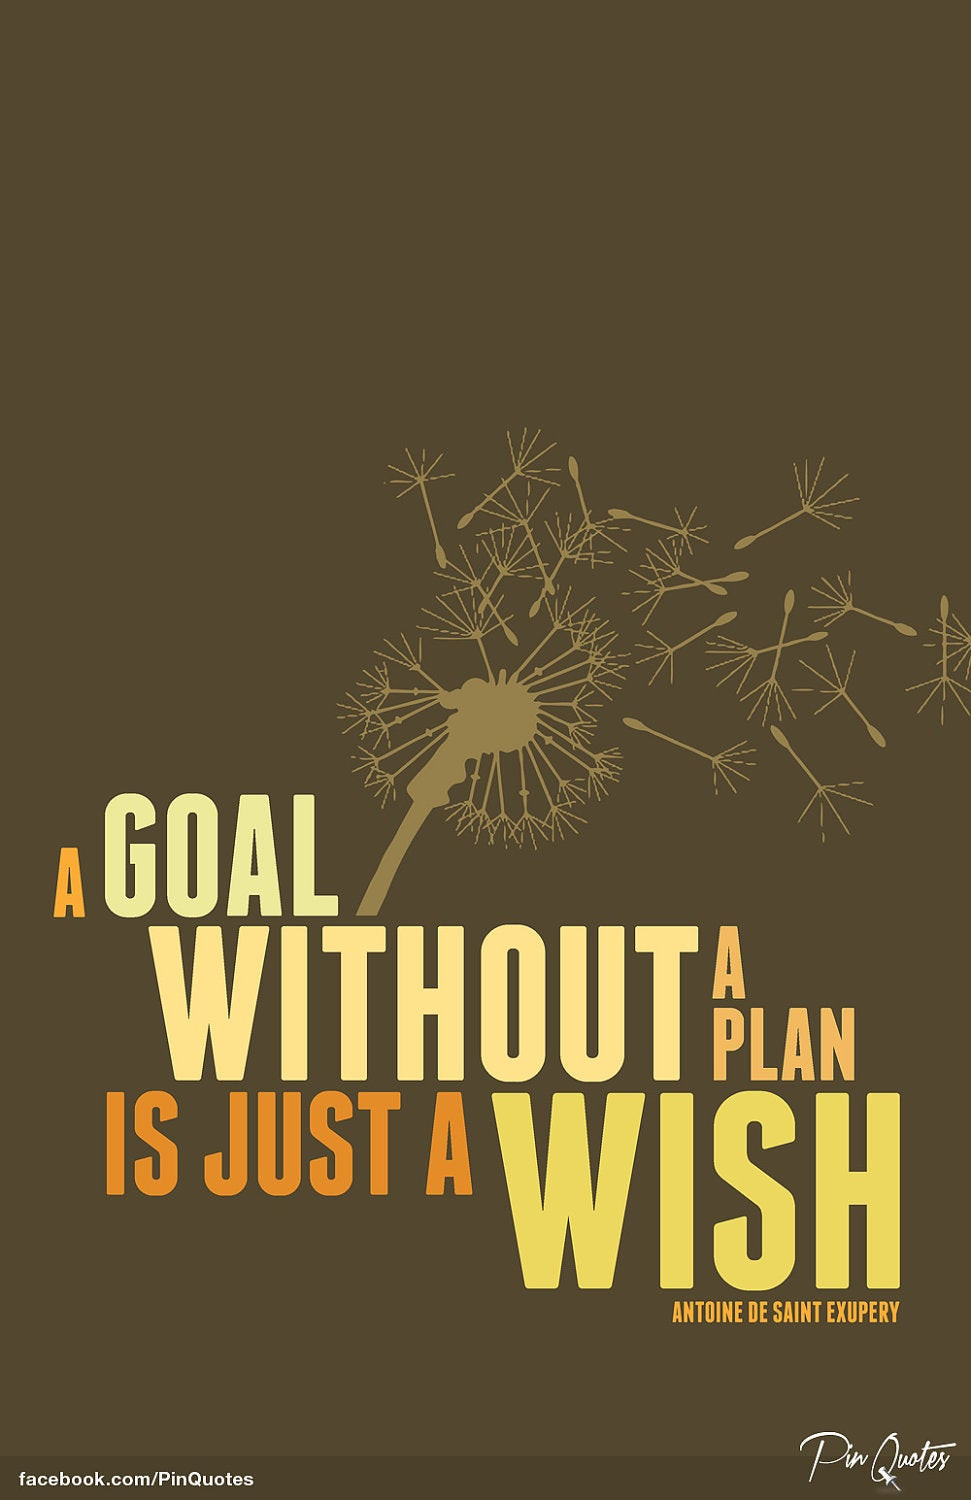 Inspirational Goals Quotes
 Inspirational Quote Canvas Art A goal without a plan by